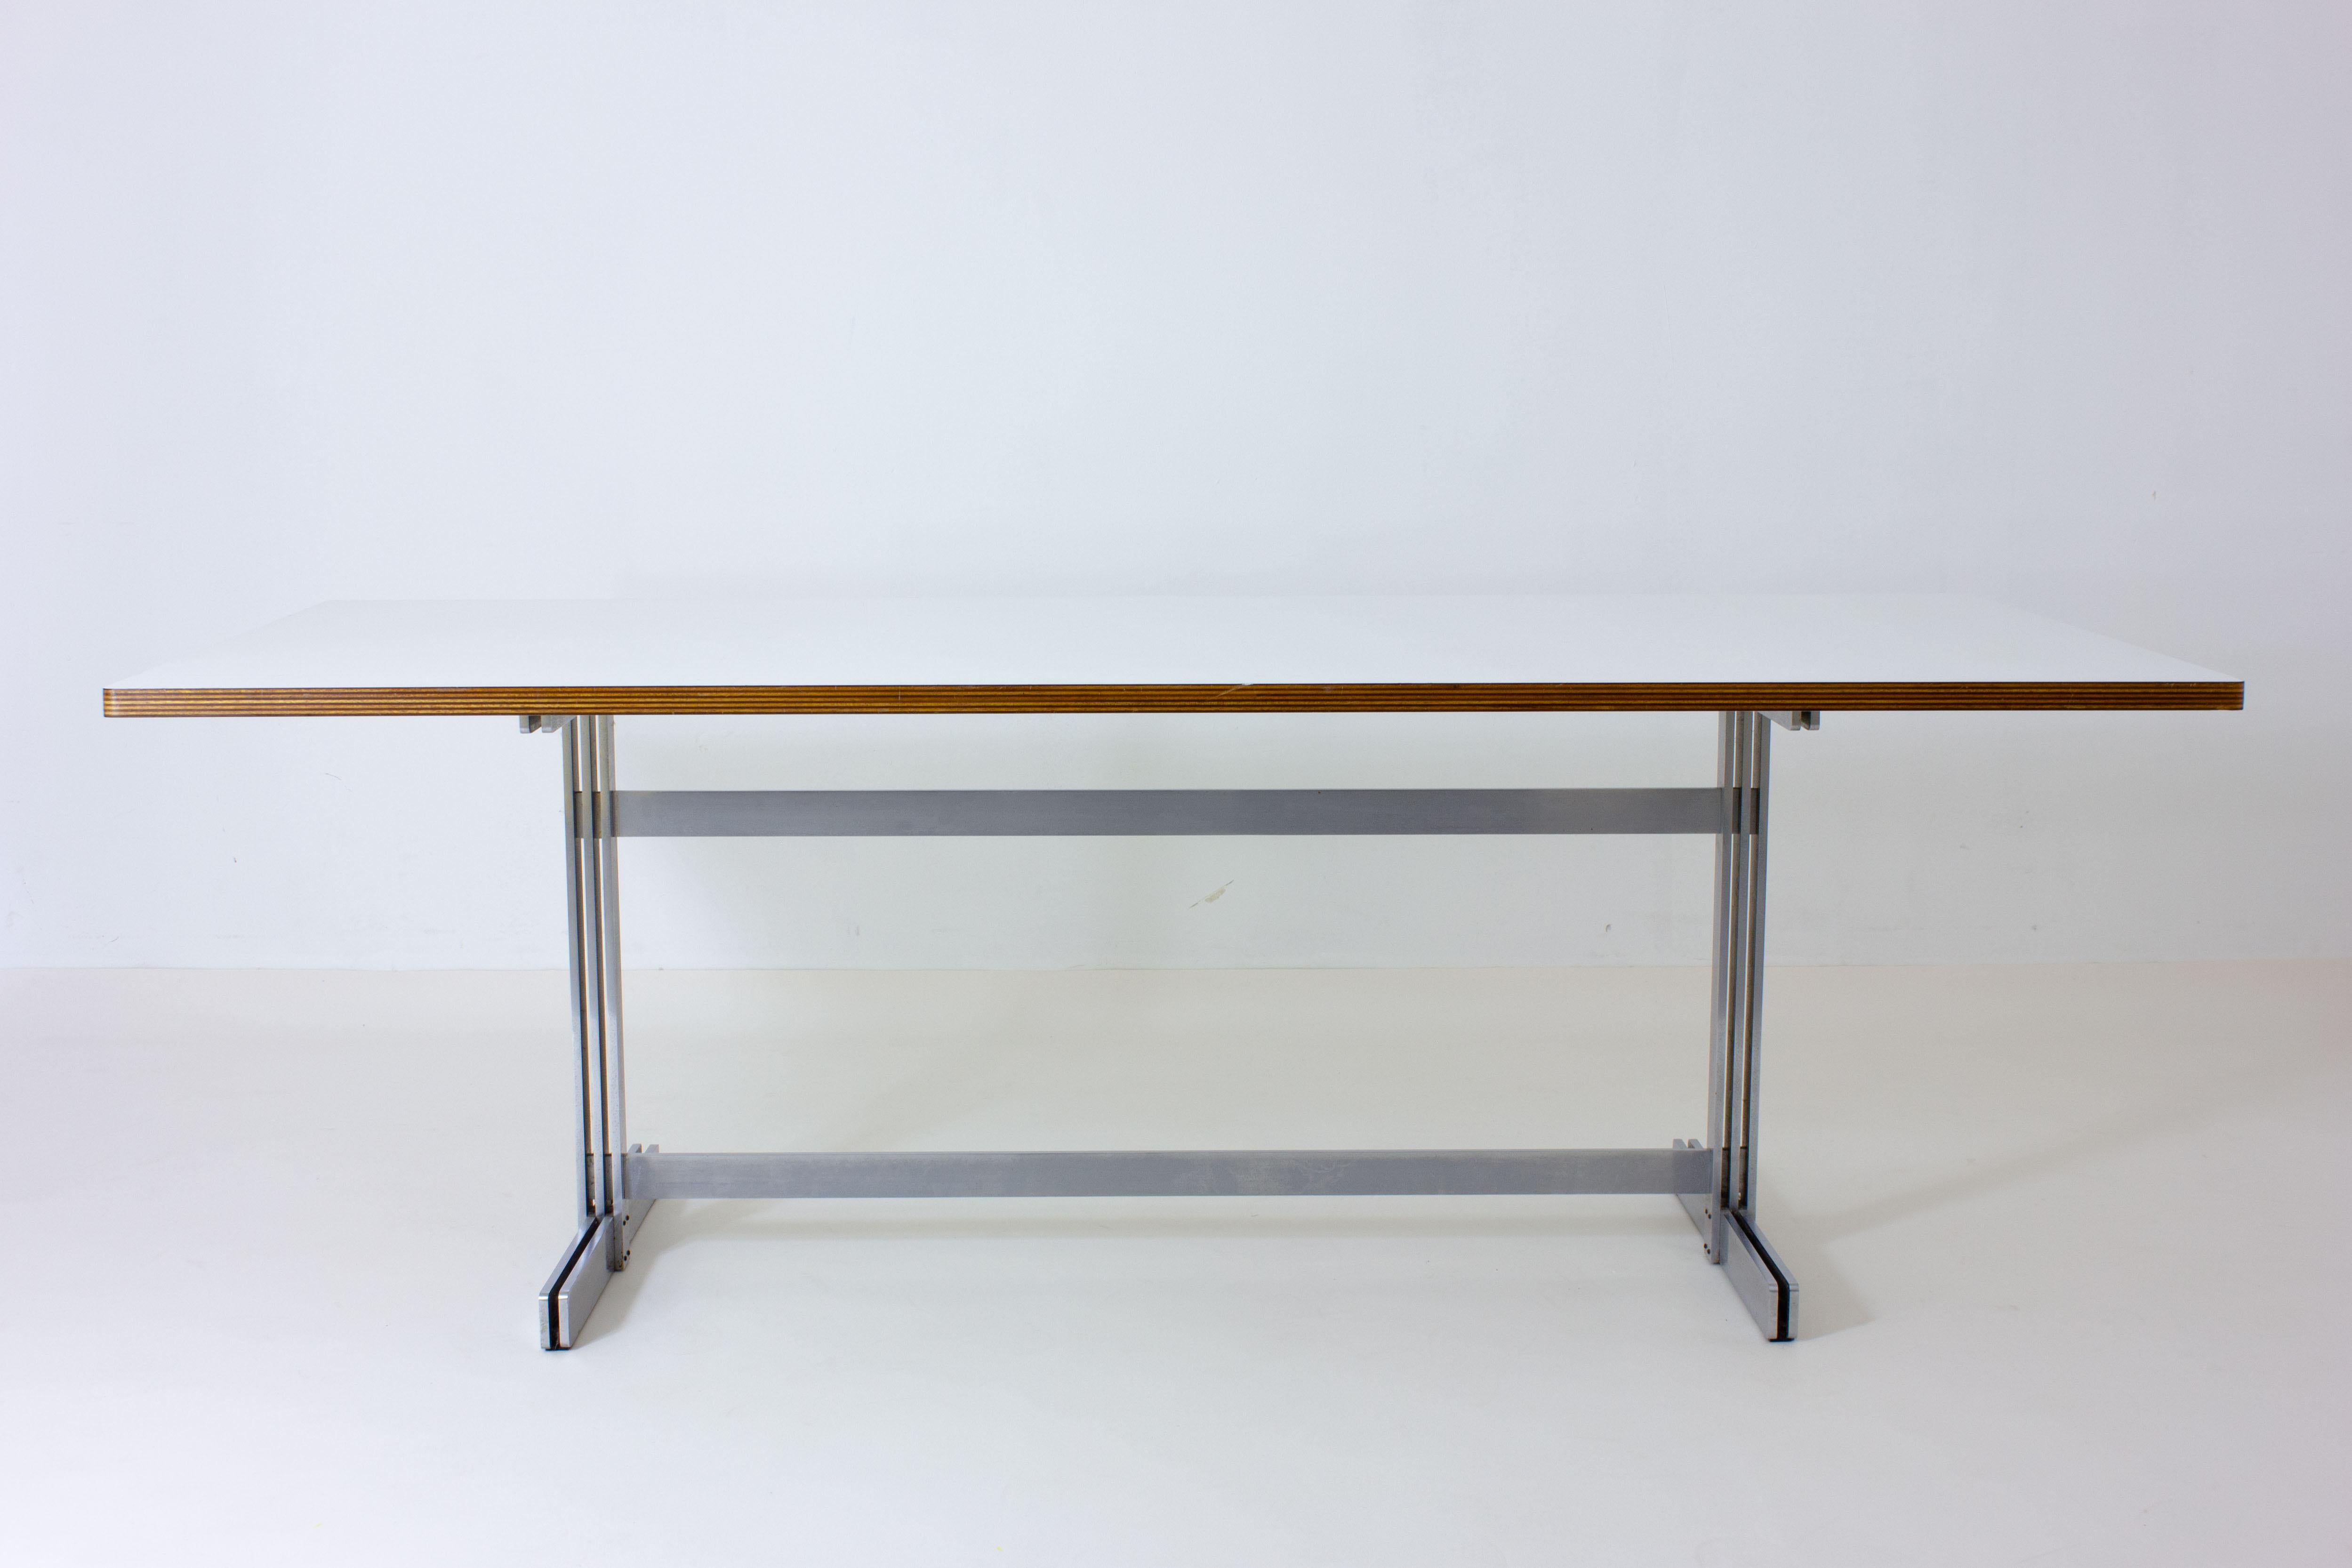 This exclusive white laminated dining table was designed by Jules Wabbes for Mobilier Universel in 1959. Known for its mid-century style, Wabbes been featured in the most notable design museums across the world. Designed to seat eight people, this